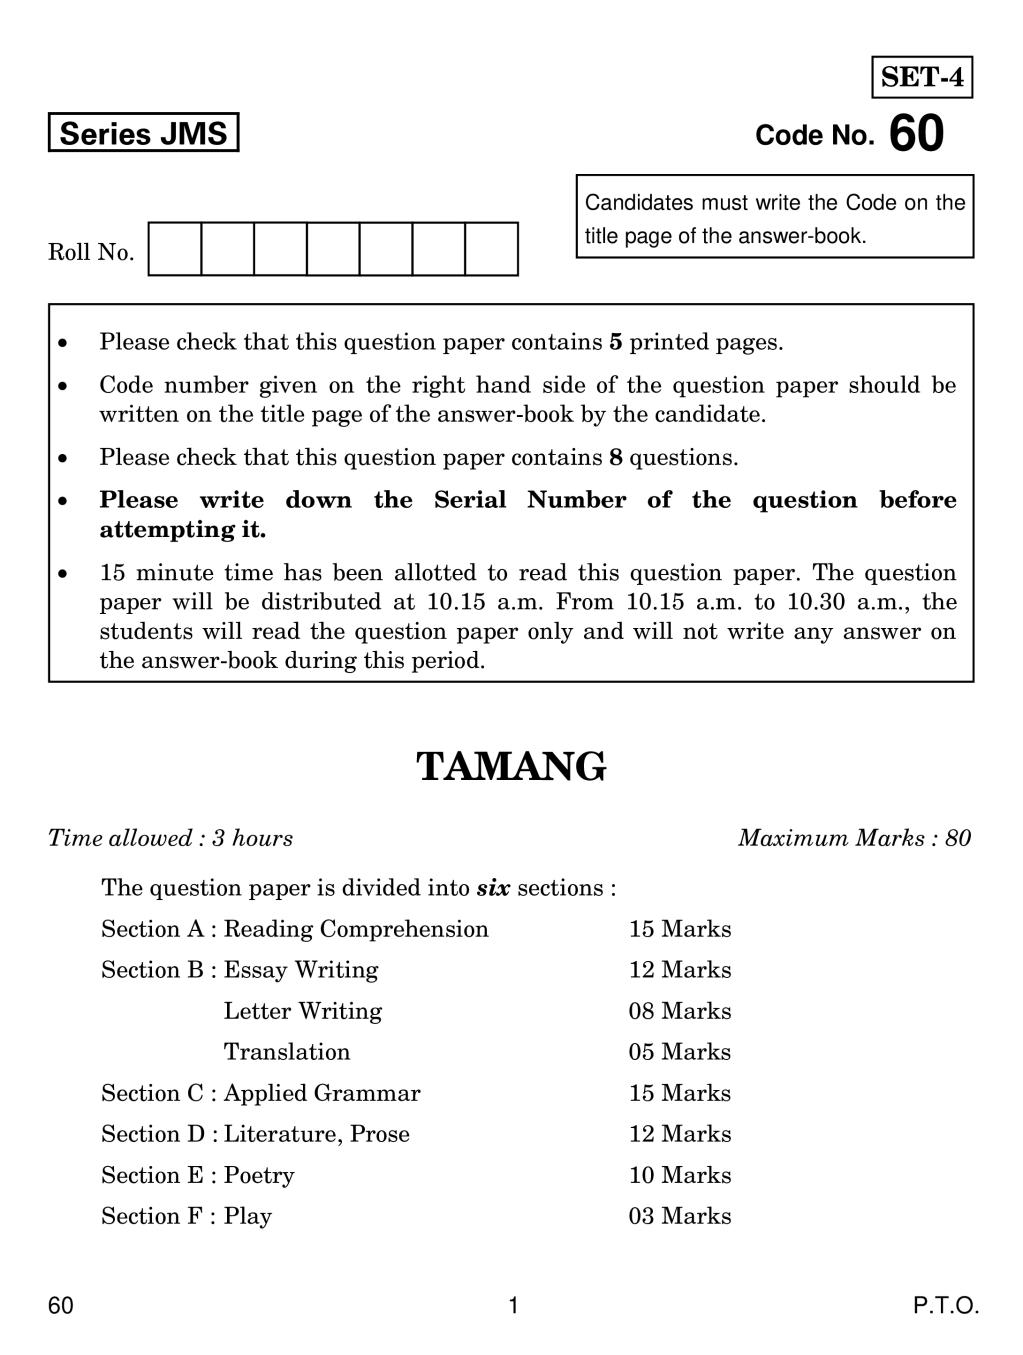 CBSE Class 10 Tamang Question Paper 2019 - Page 1